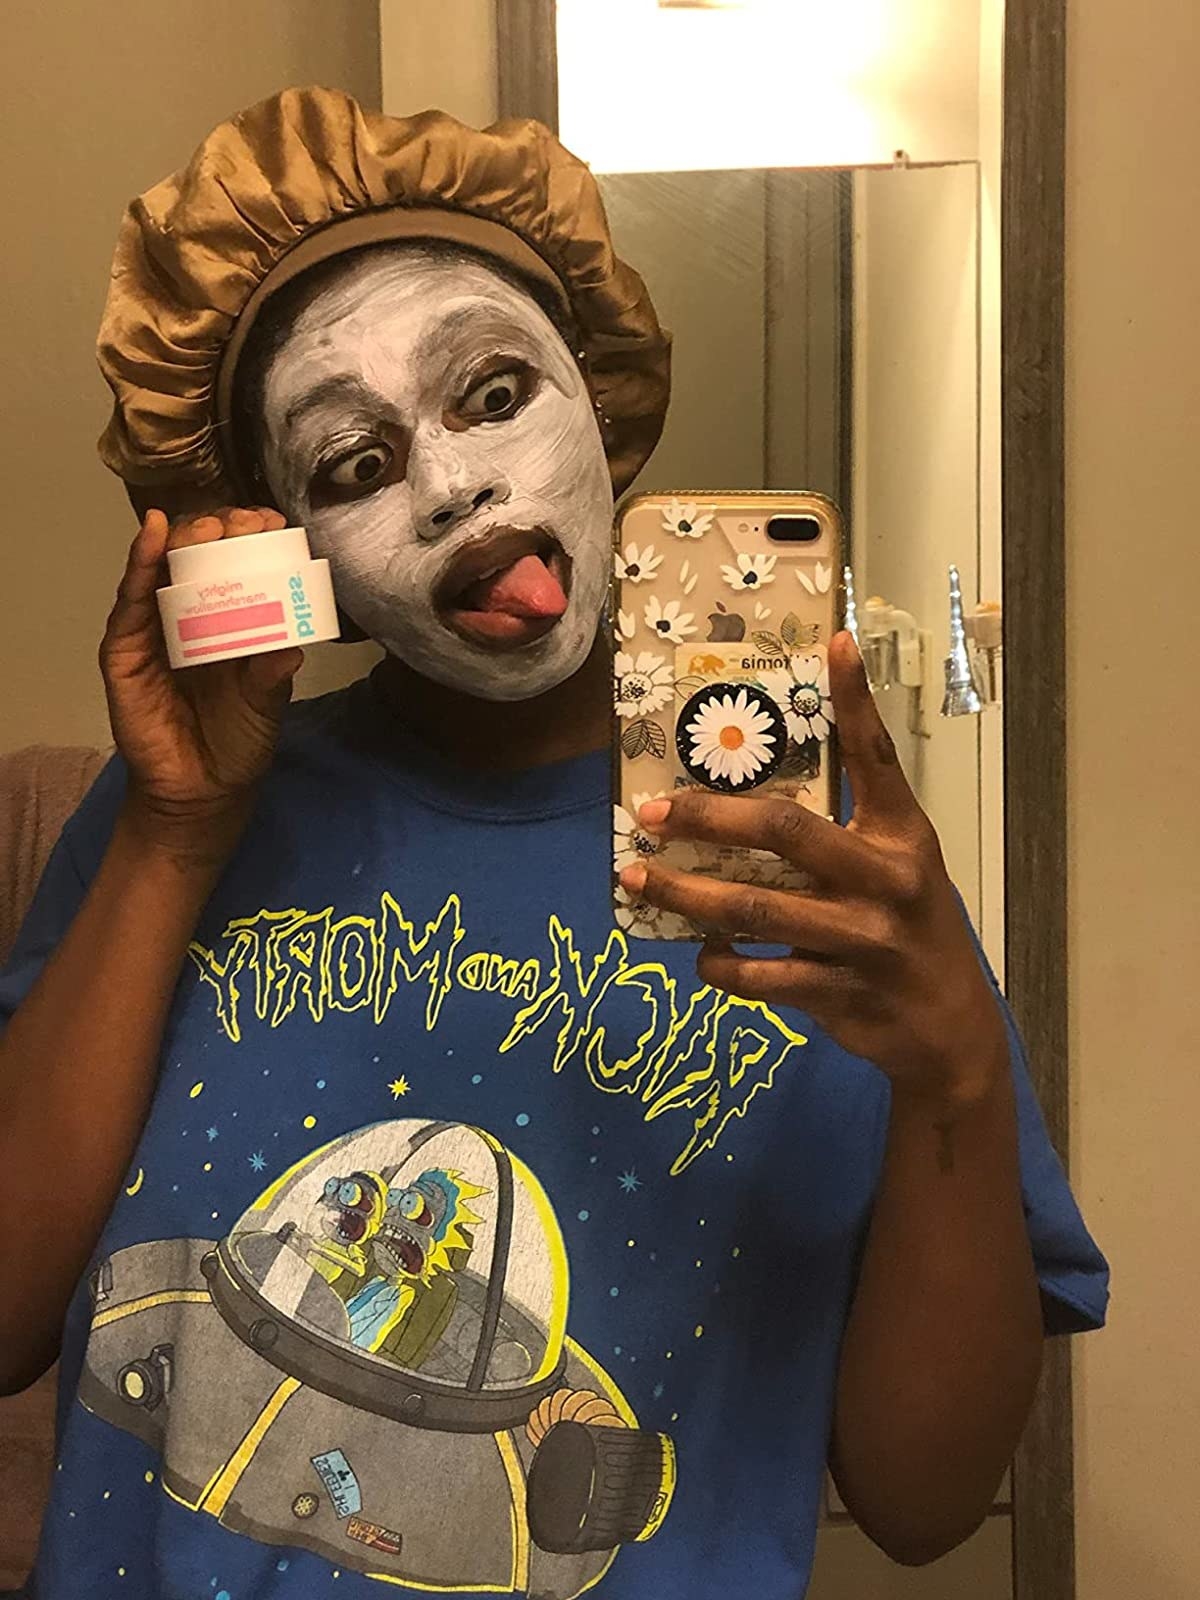 A reviewer taking a selfie with a mask on them